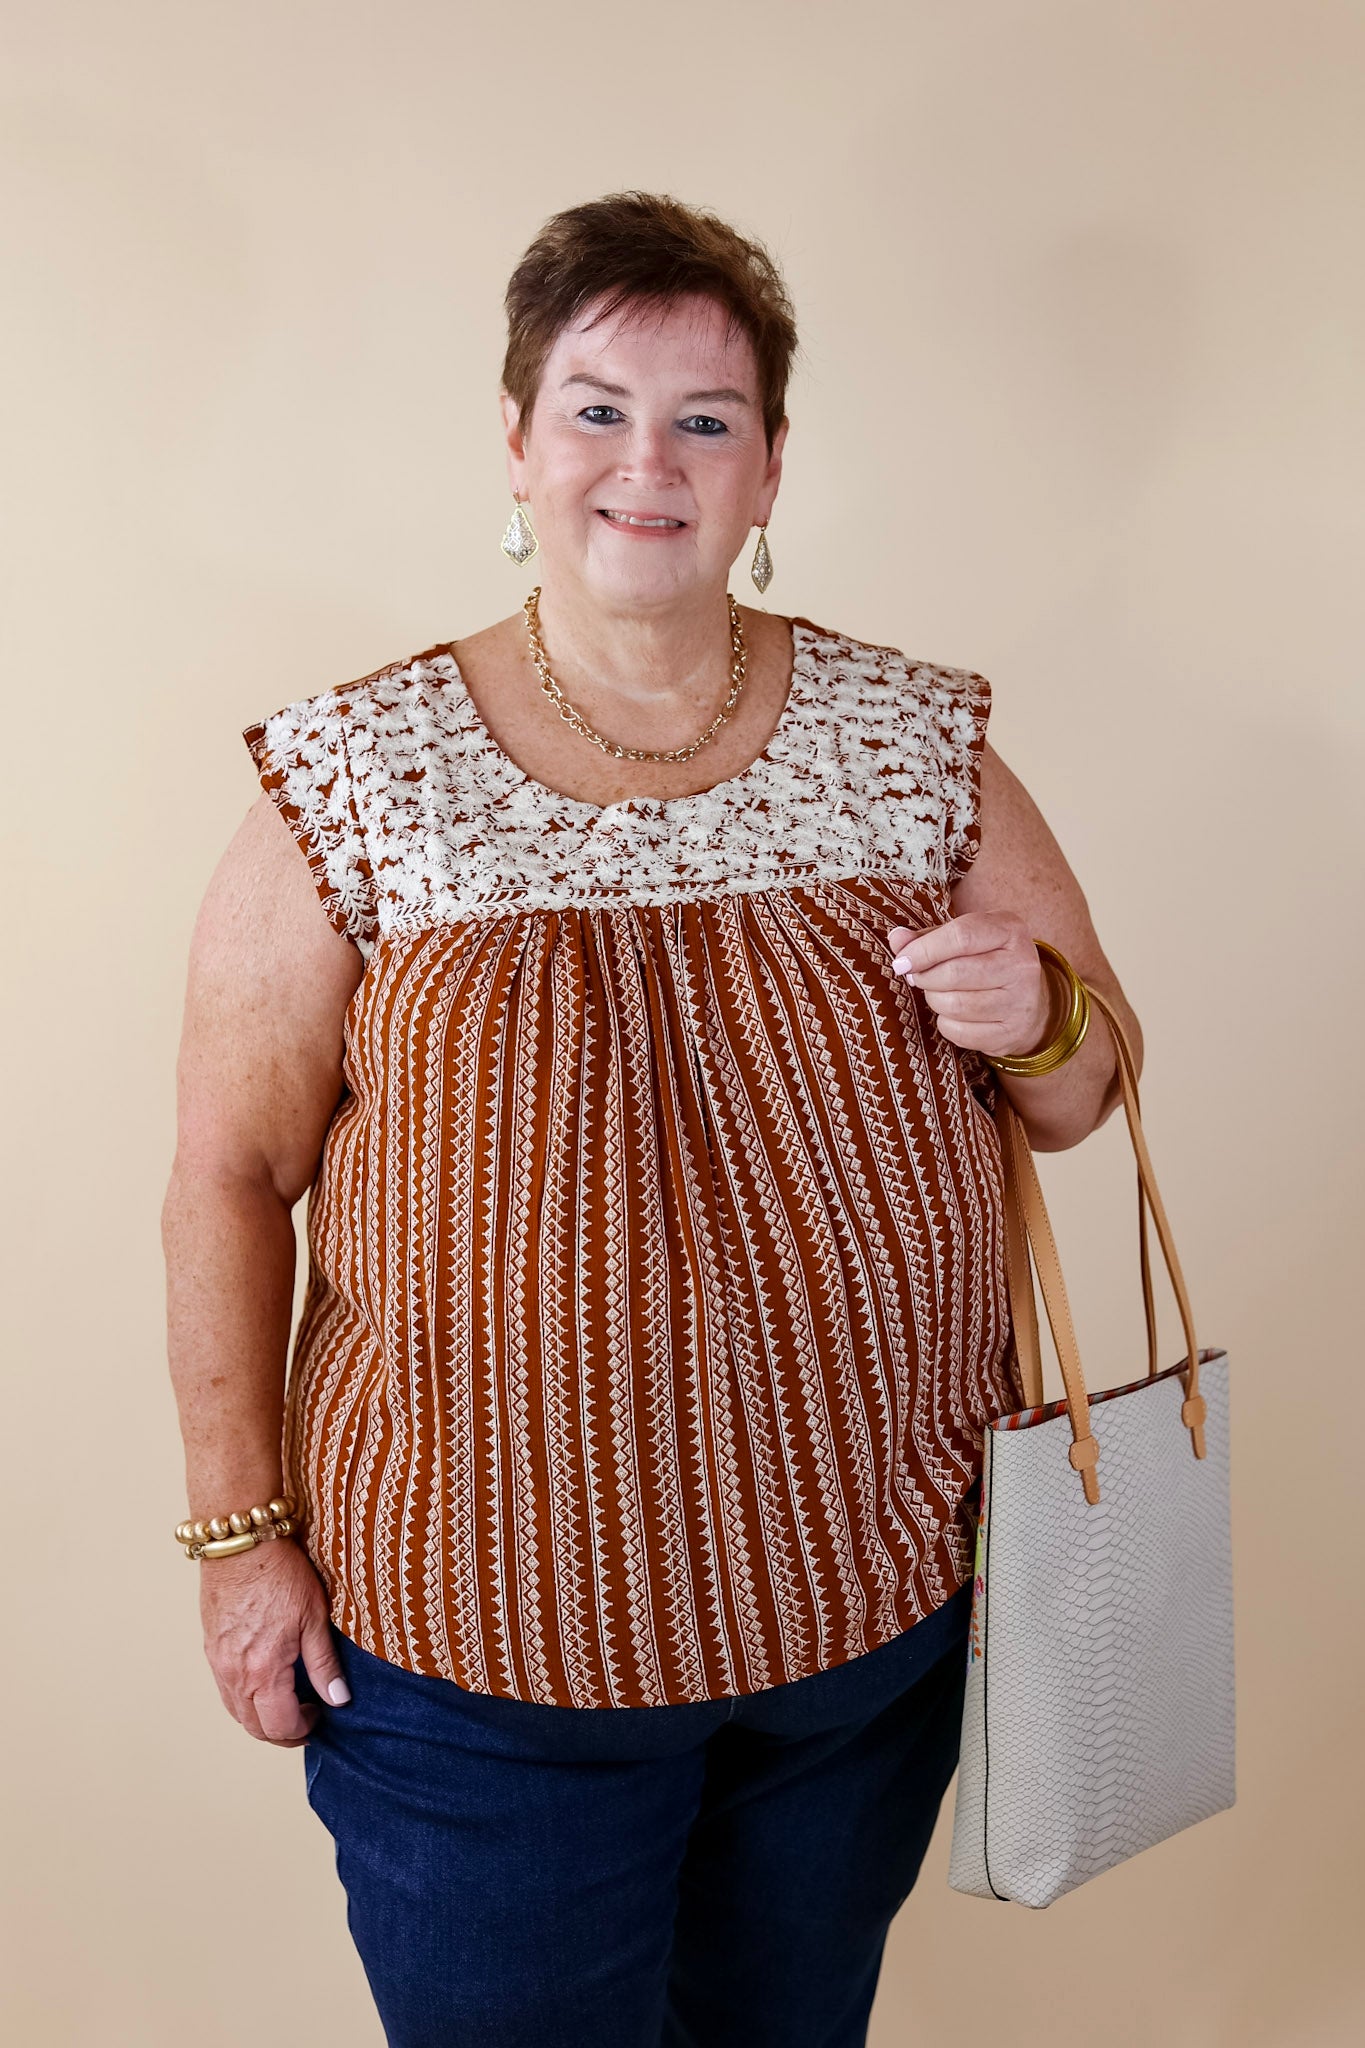 Afternoon Stroll Embroidered Tribal Top with Cap Sleeves in Rust Brown - Giddy Up Glamour Boutique